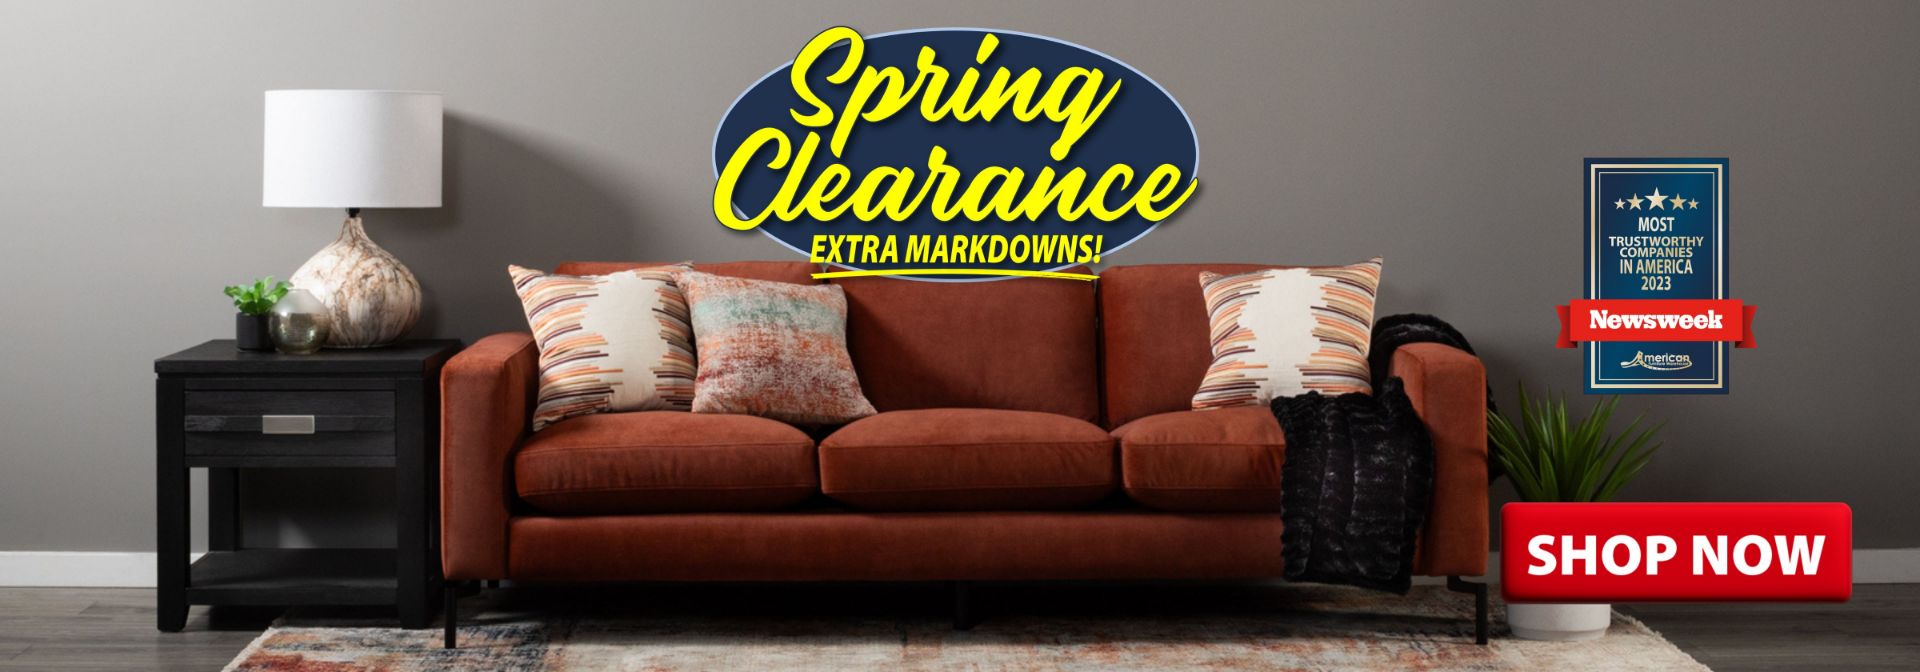 Spring Clearance: Extra Markdowns